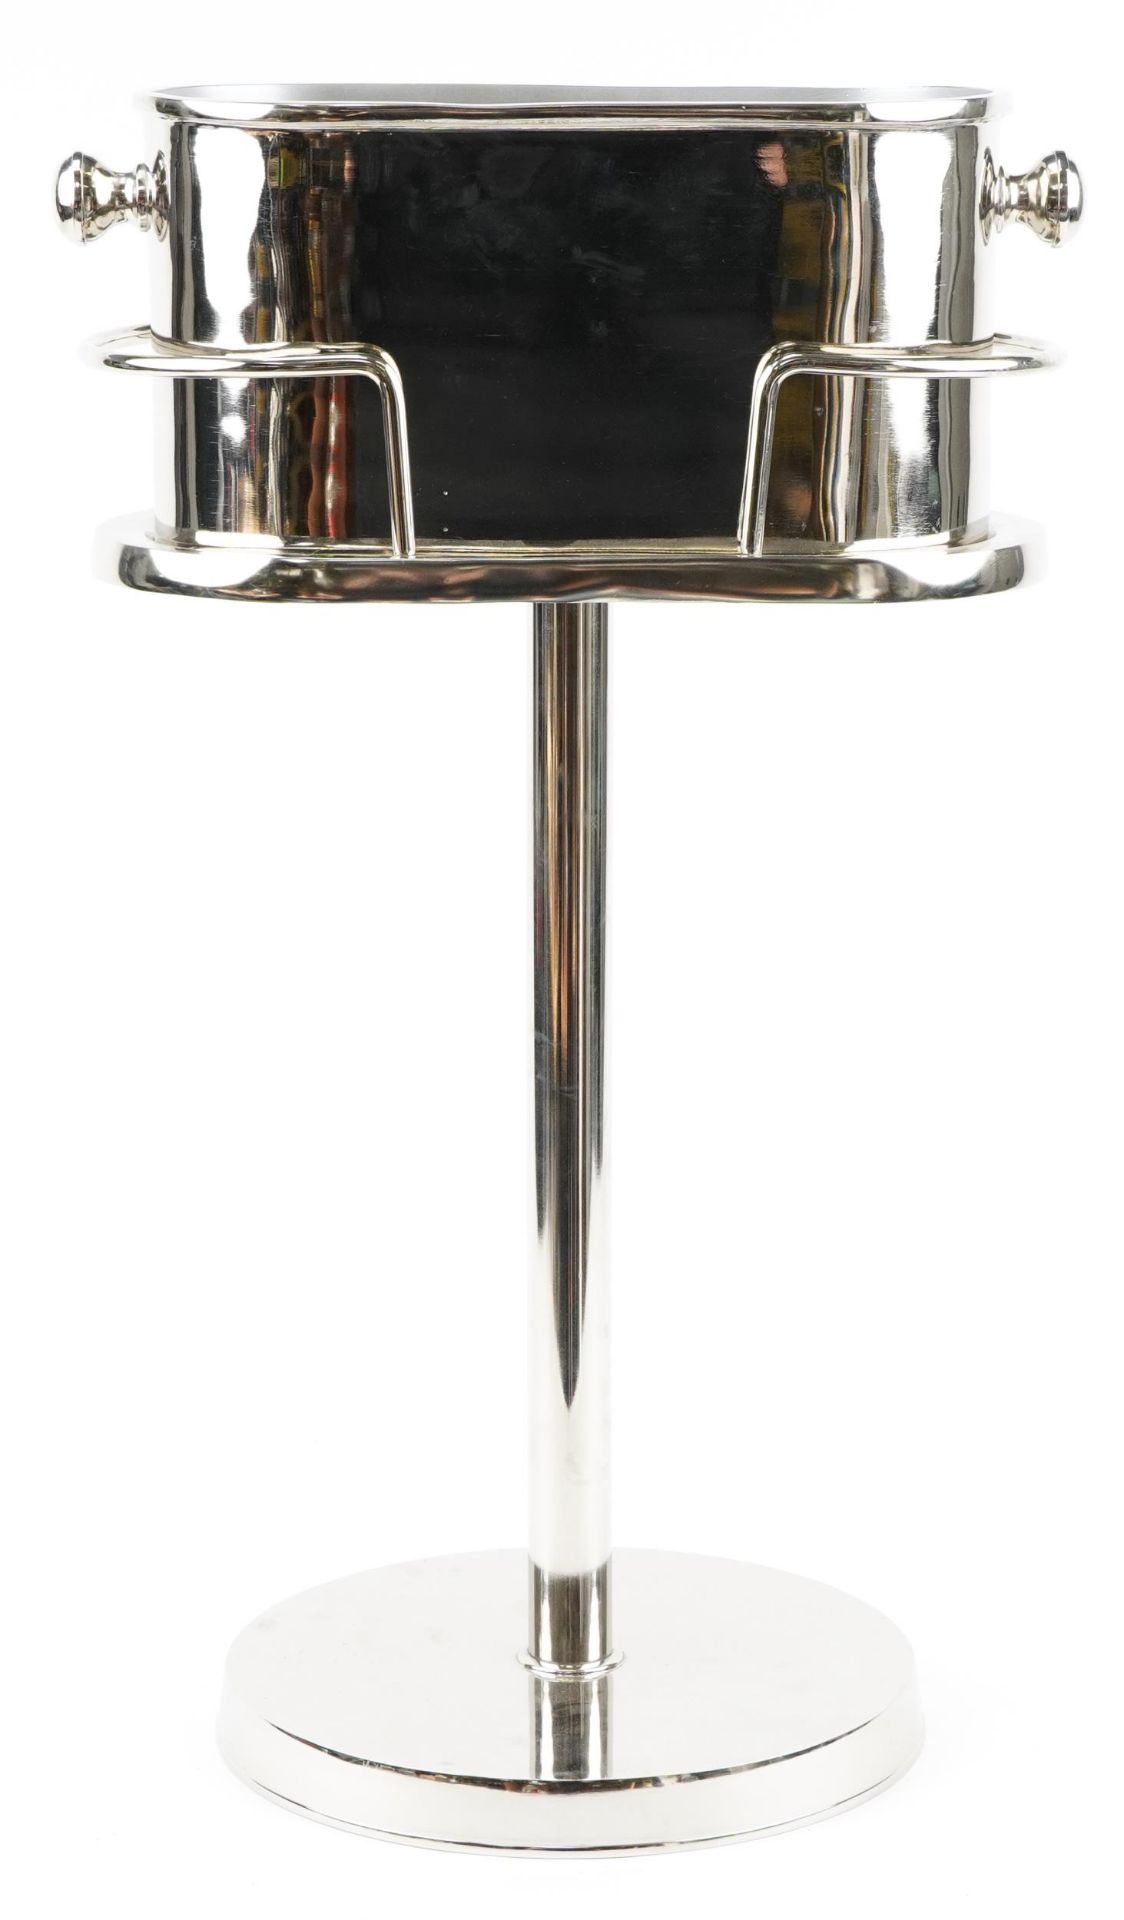 Silver plated Champagne bucket on stand, 74cm high x 41cm wide : For further information on this lot